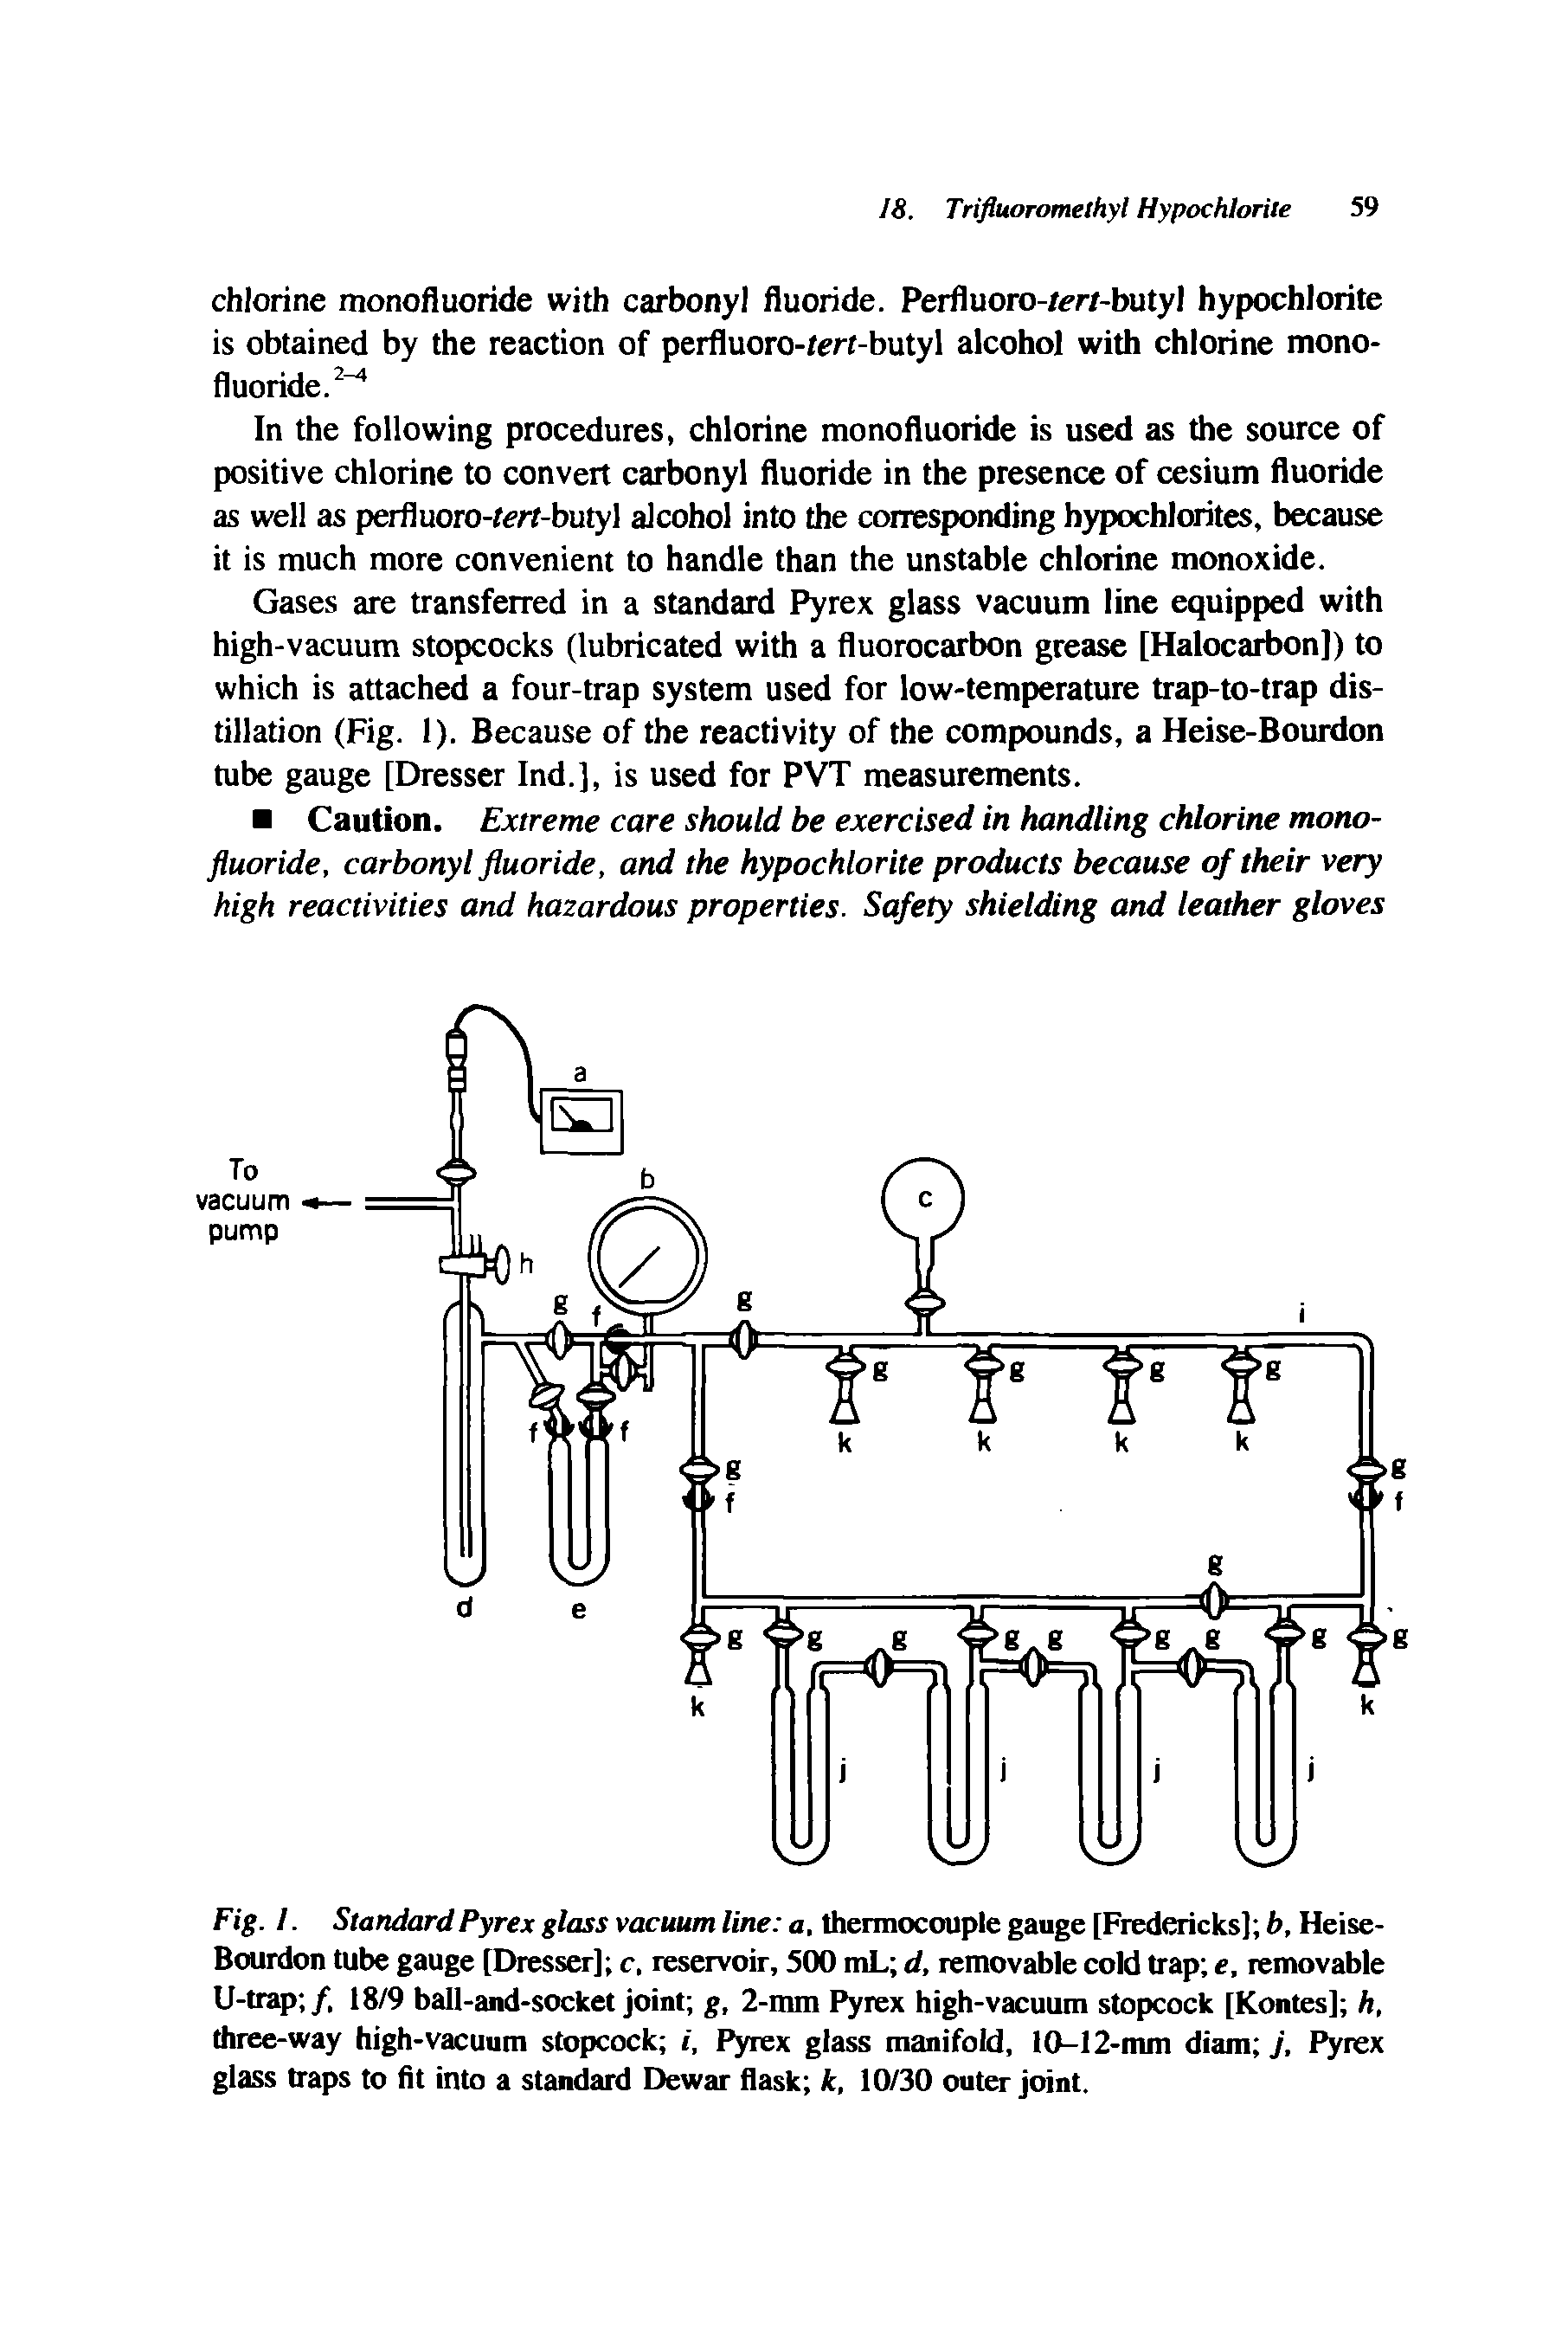 Fig. I. Standard Pyrex glass vacuum line a, thermocouple gauge [Fredericks] b, Heise-Bourdon tube gauge [Dresser] c, reservoir, 500 mL d, removable cold trap e, removable U-trap /, 18/9 ball-and-socket joint g, 2-mm Pyrex high-vacuum stopcock [Kontes] h, three-way high-vacuum stopcock i, Pyrex glass manifold, 10-12-mm diam j, Pyrex glass traps to fit into a standard Dewar flask k, 10/30 outer joint.